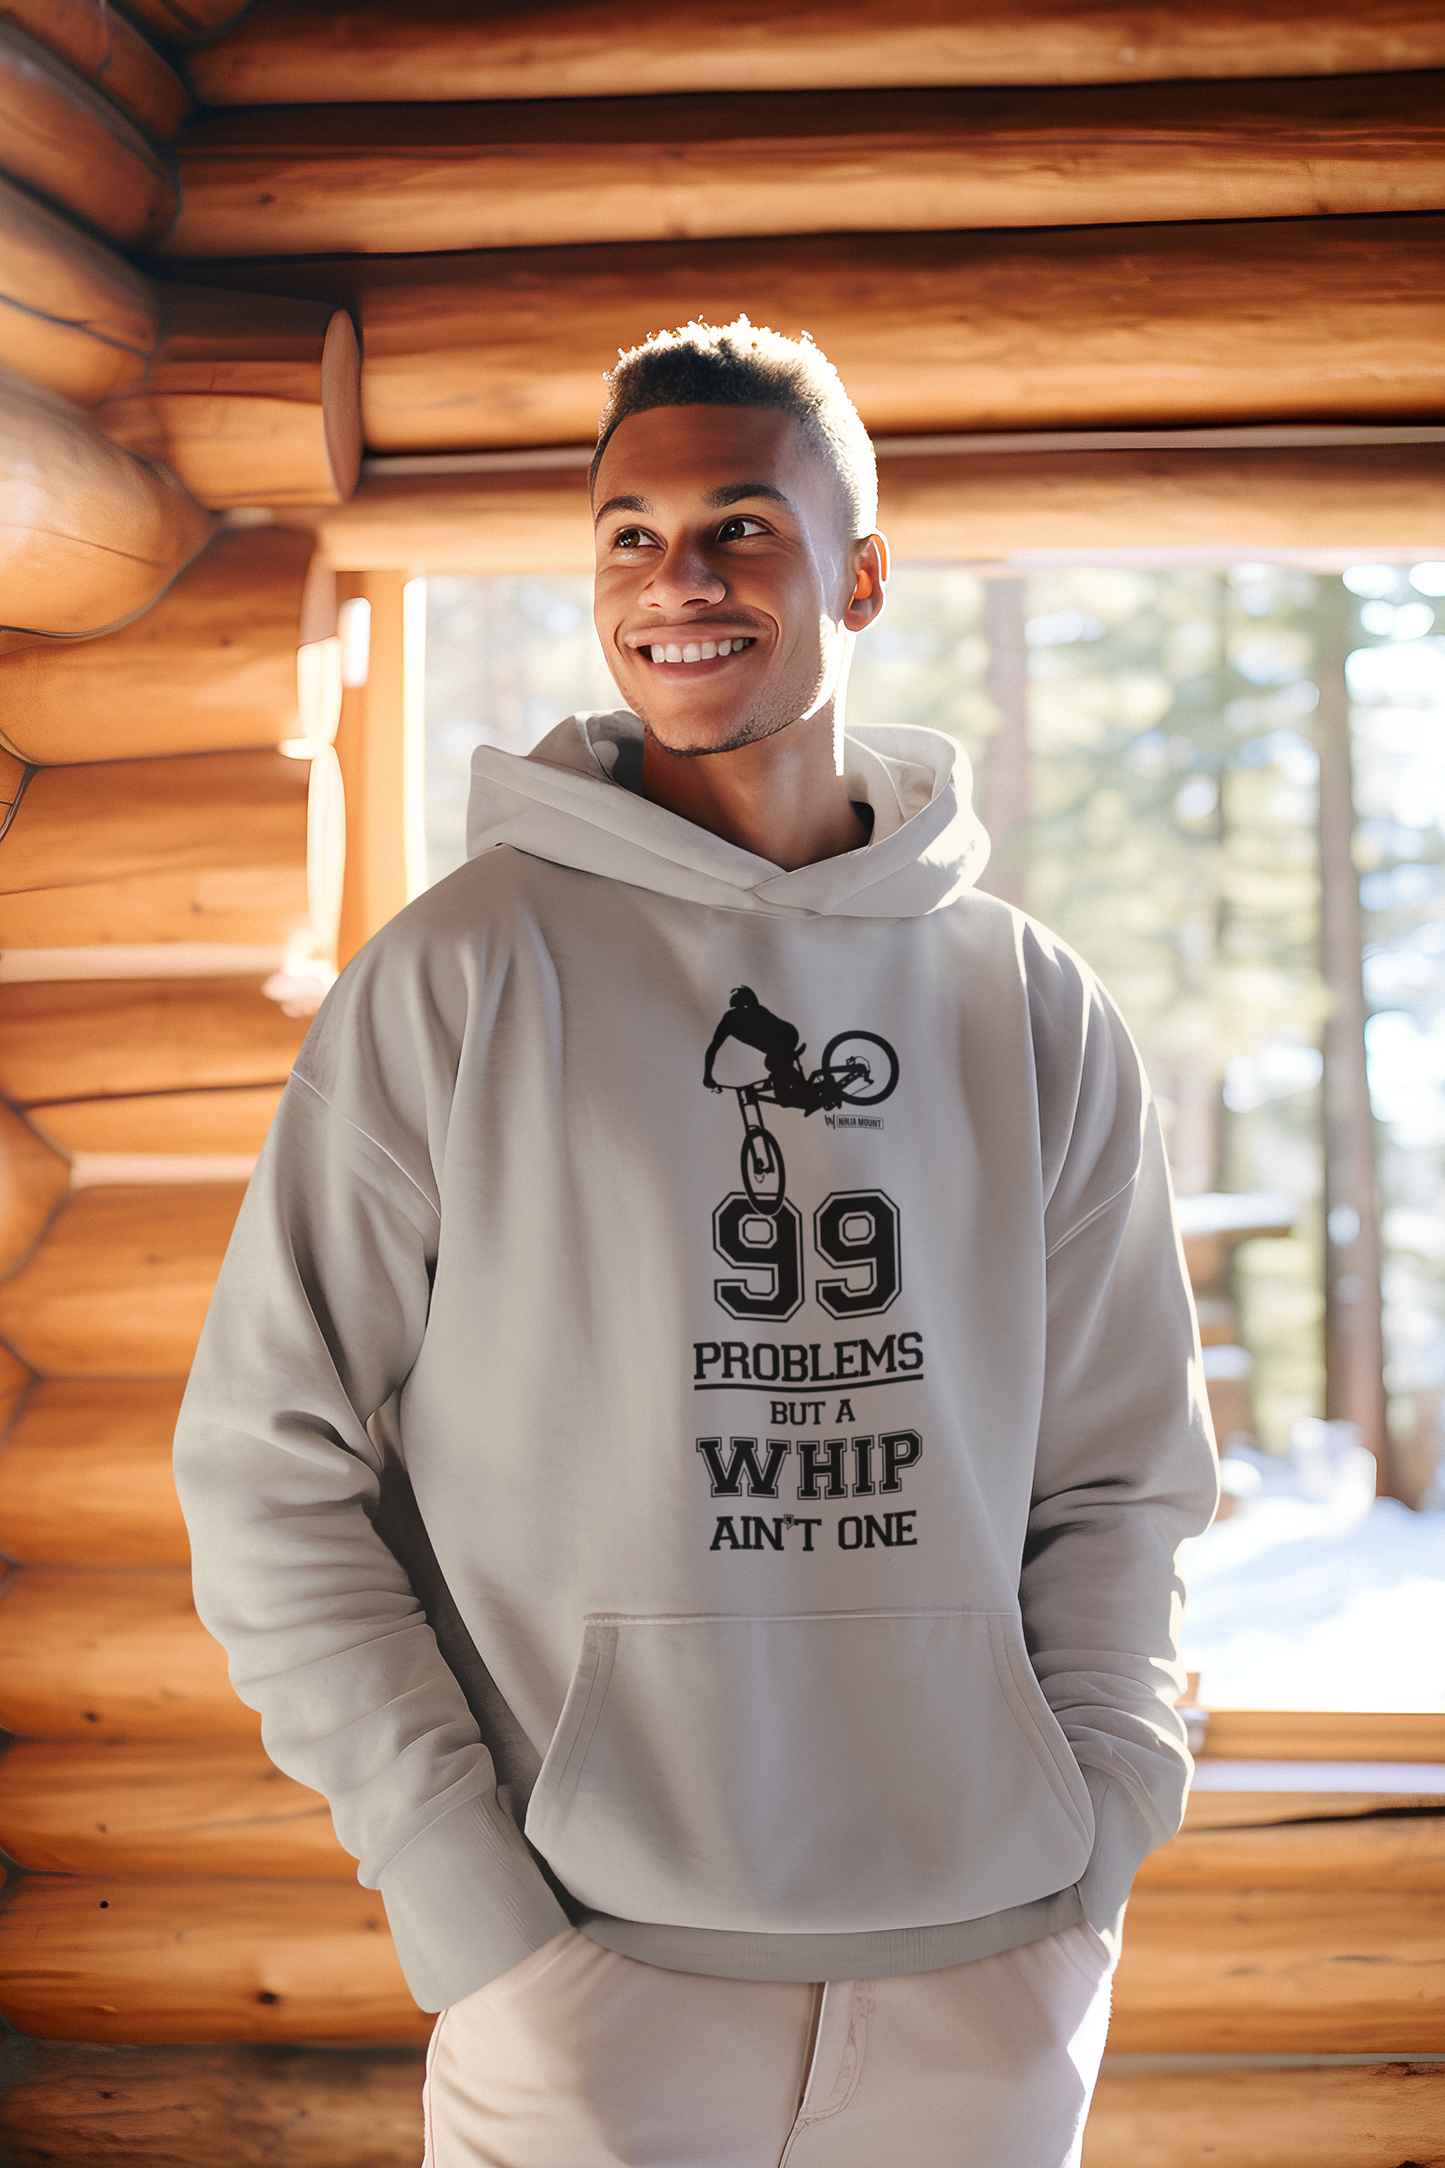 99 Problems but a Whip ain't One - Organic Hoodie - HEATHER GREY